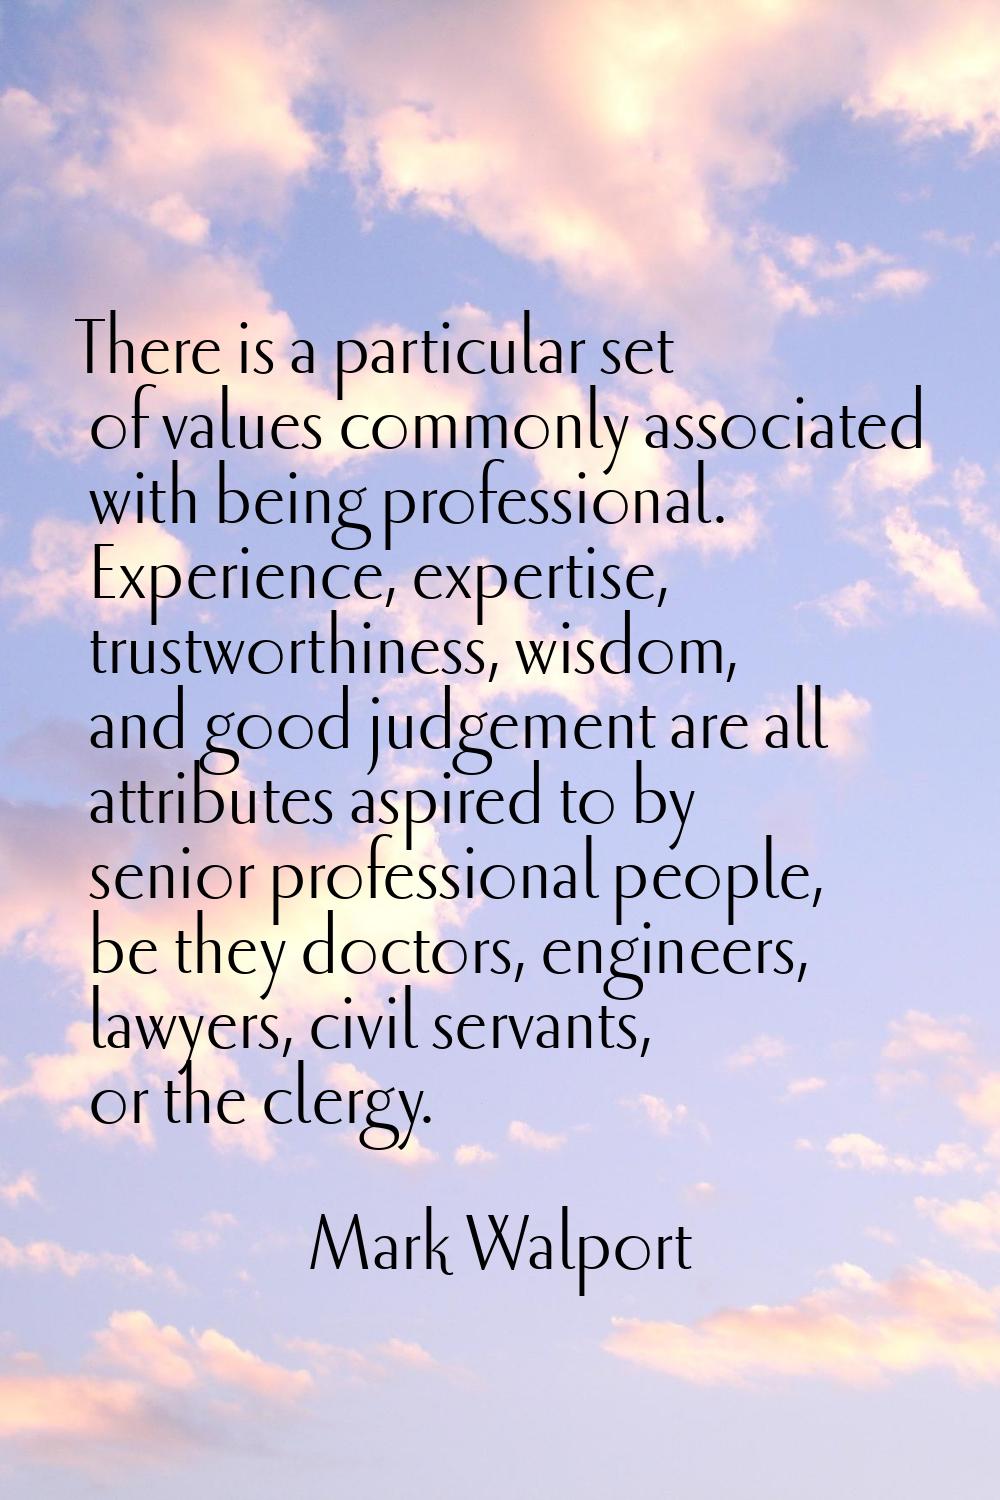 There is a particular set of values commonly associated with being professional. Experience, expert